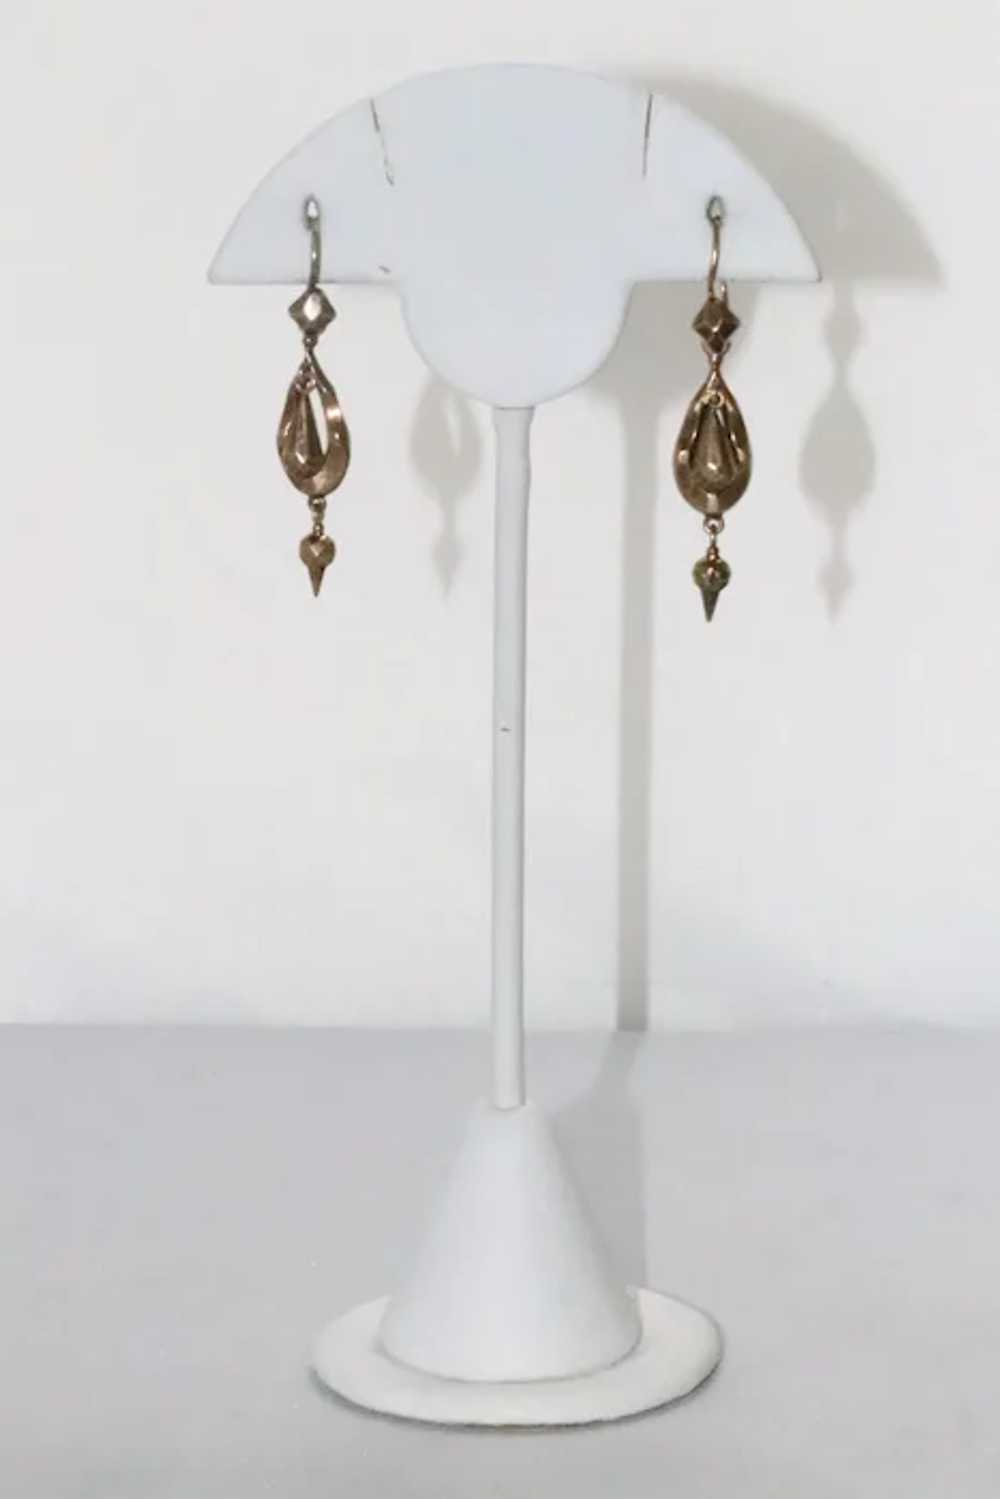 Vintage 10 KT Yellow Gold Dangling Earrings - image 2